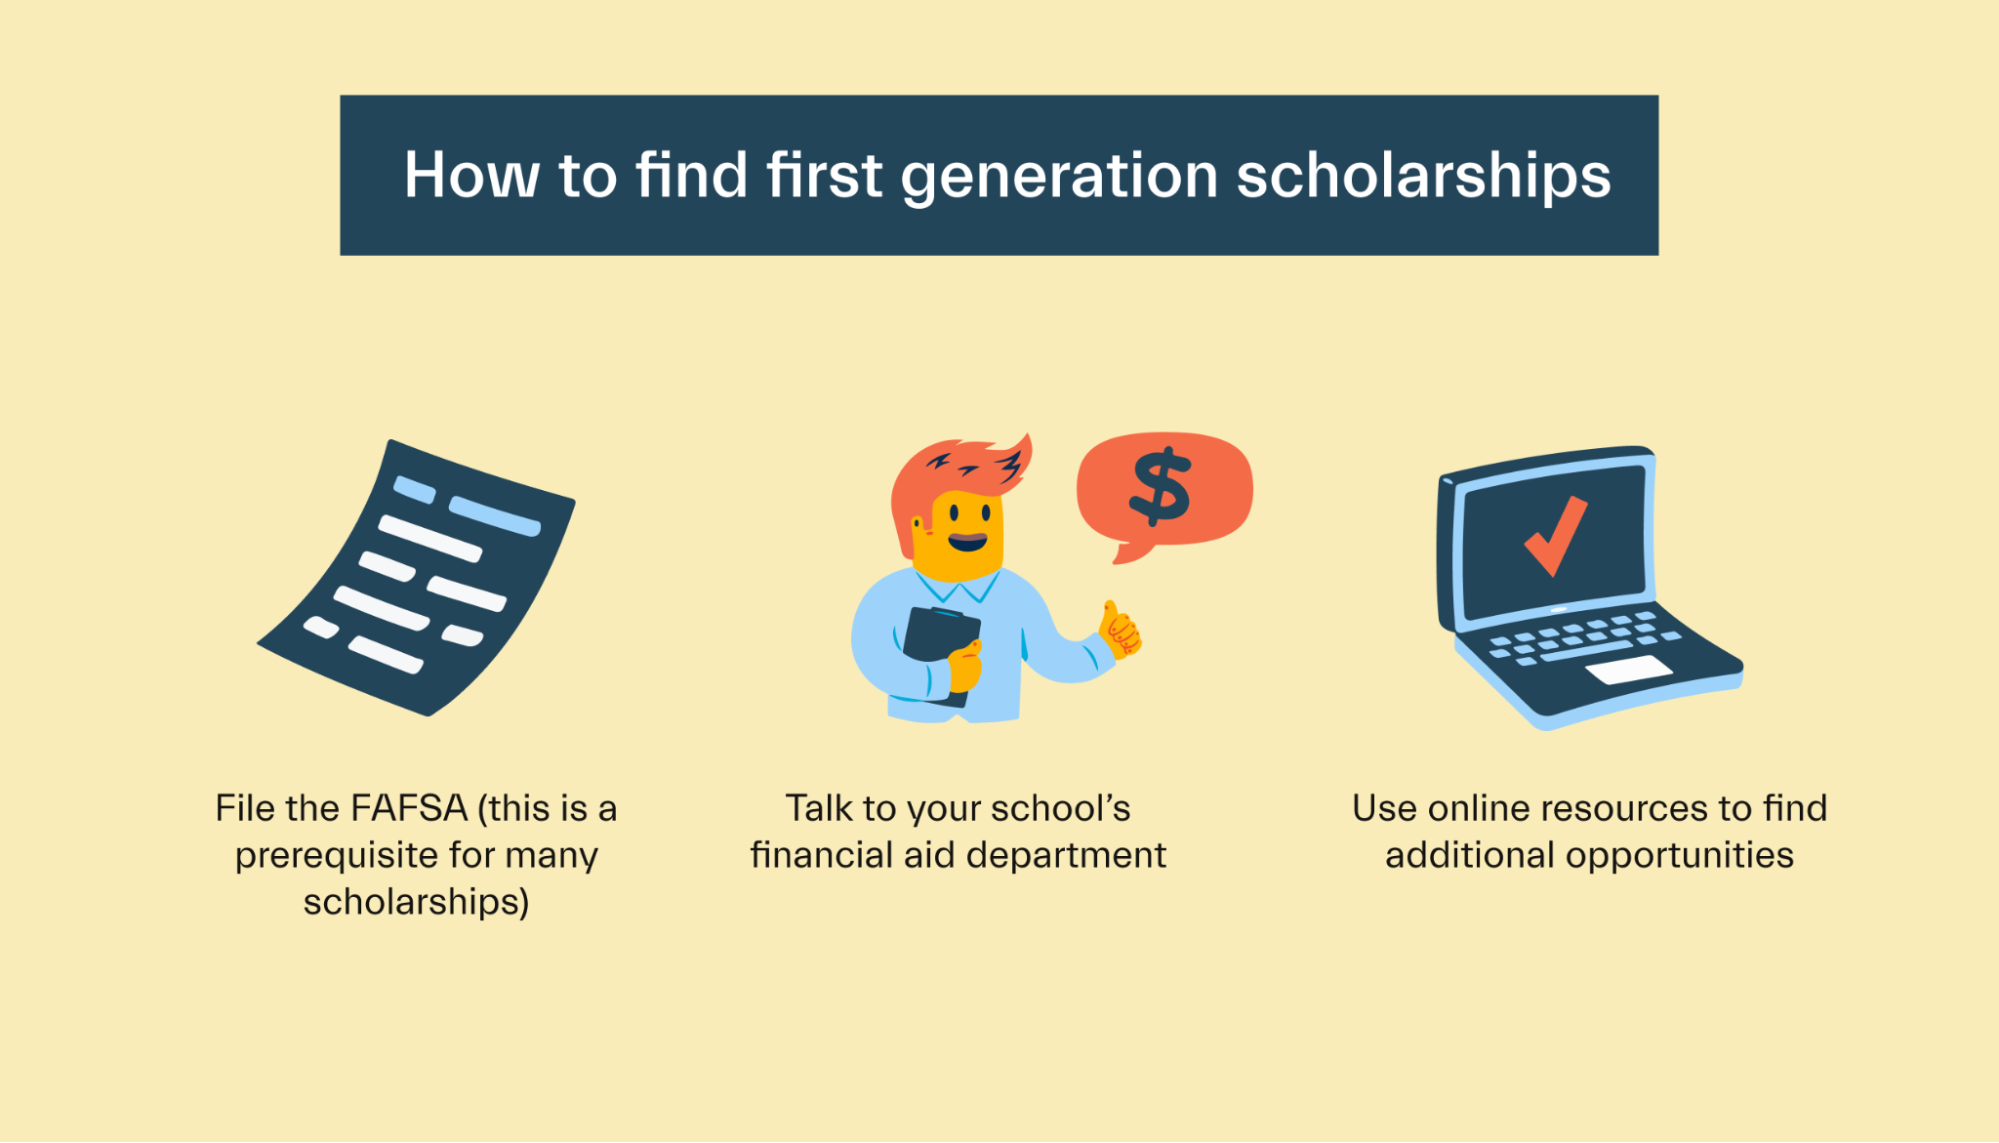 How to find first generation scholarships